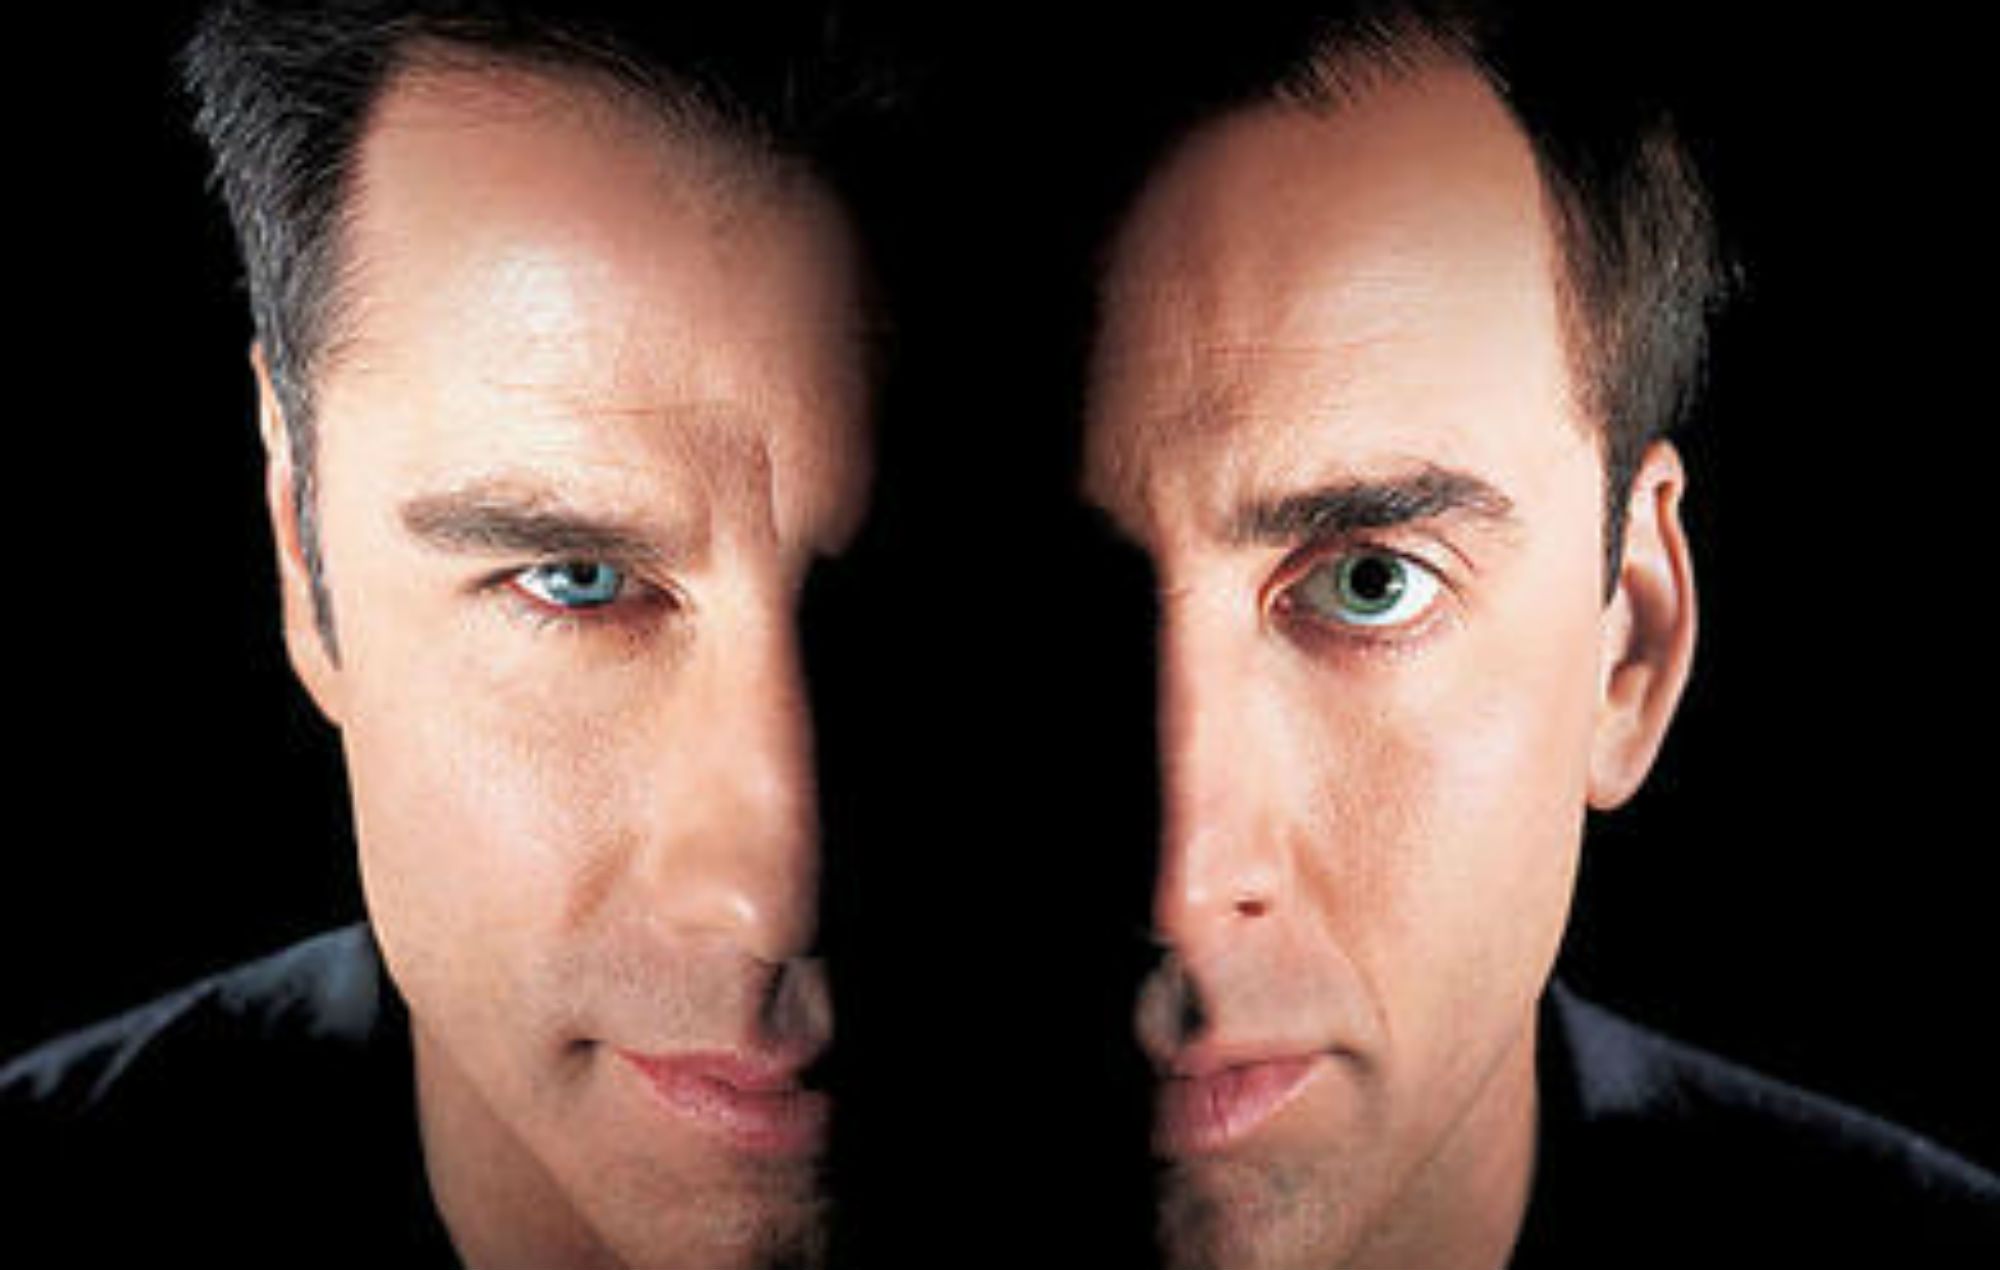 Face/Off 2: Cage And Travolta Reportedly Interested In Returning For Sequel